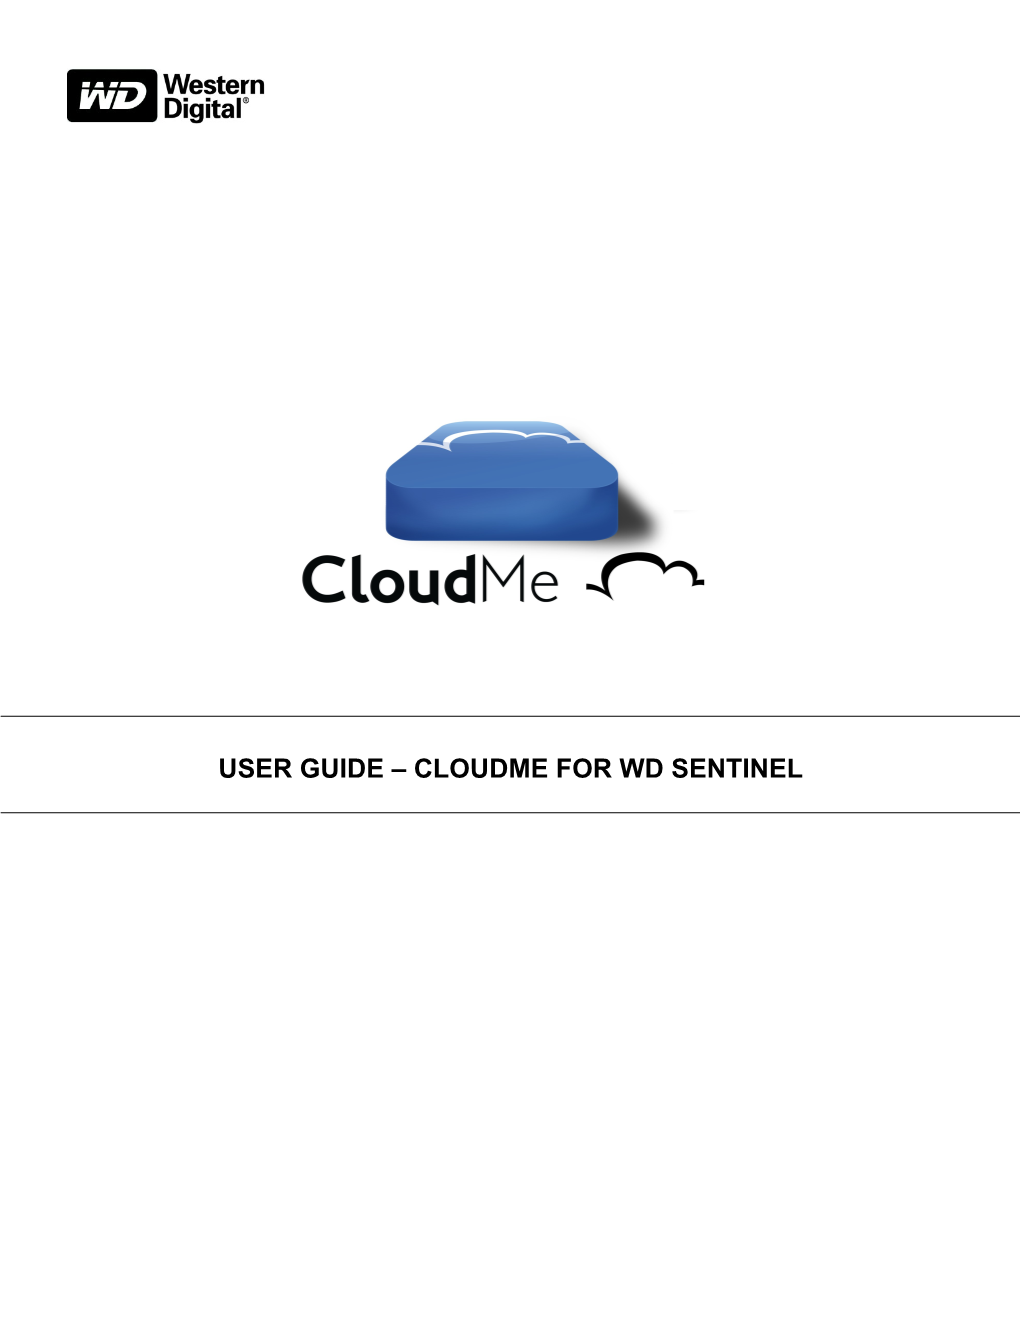 Overview Cloudme AB